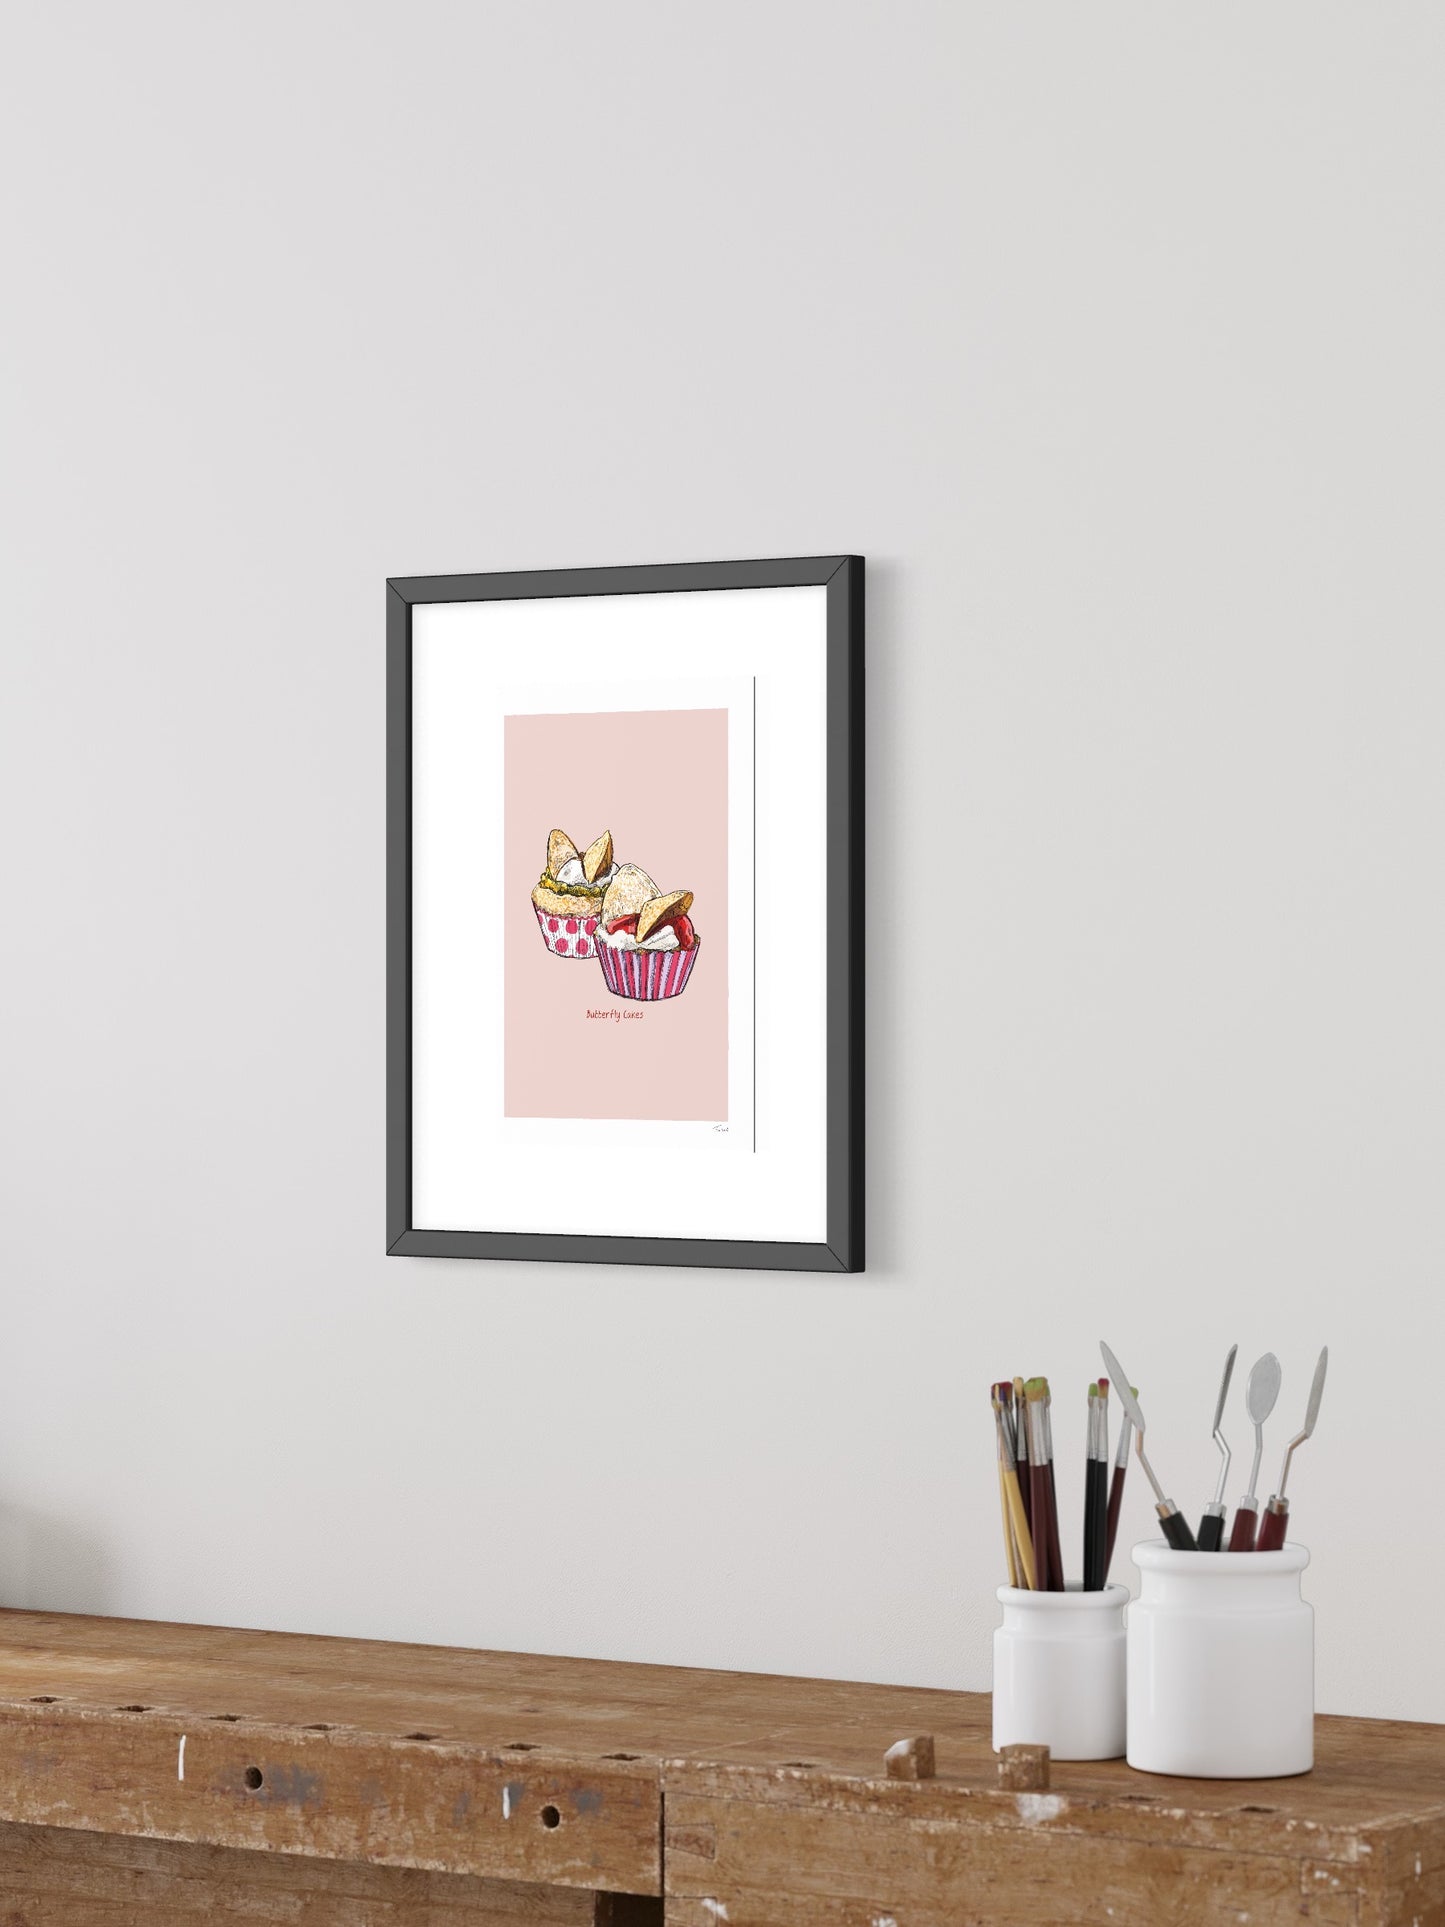 This image shows a giclee wall art print by Tom Laird Illustration of Butterfly Cakes, framed in a beautiful living room with tasteful modern home decor. This art print is available from Tom Laird Illustration in various sizes.